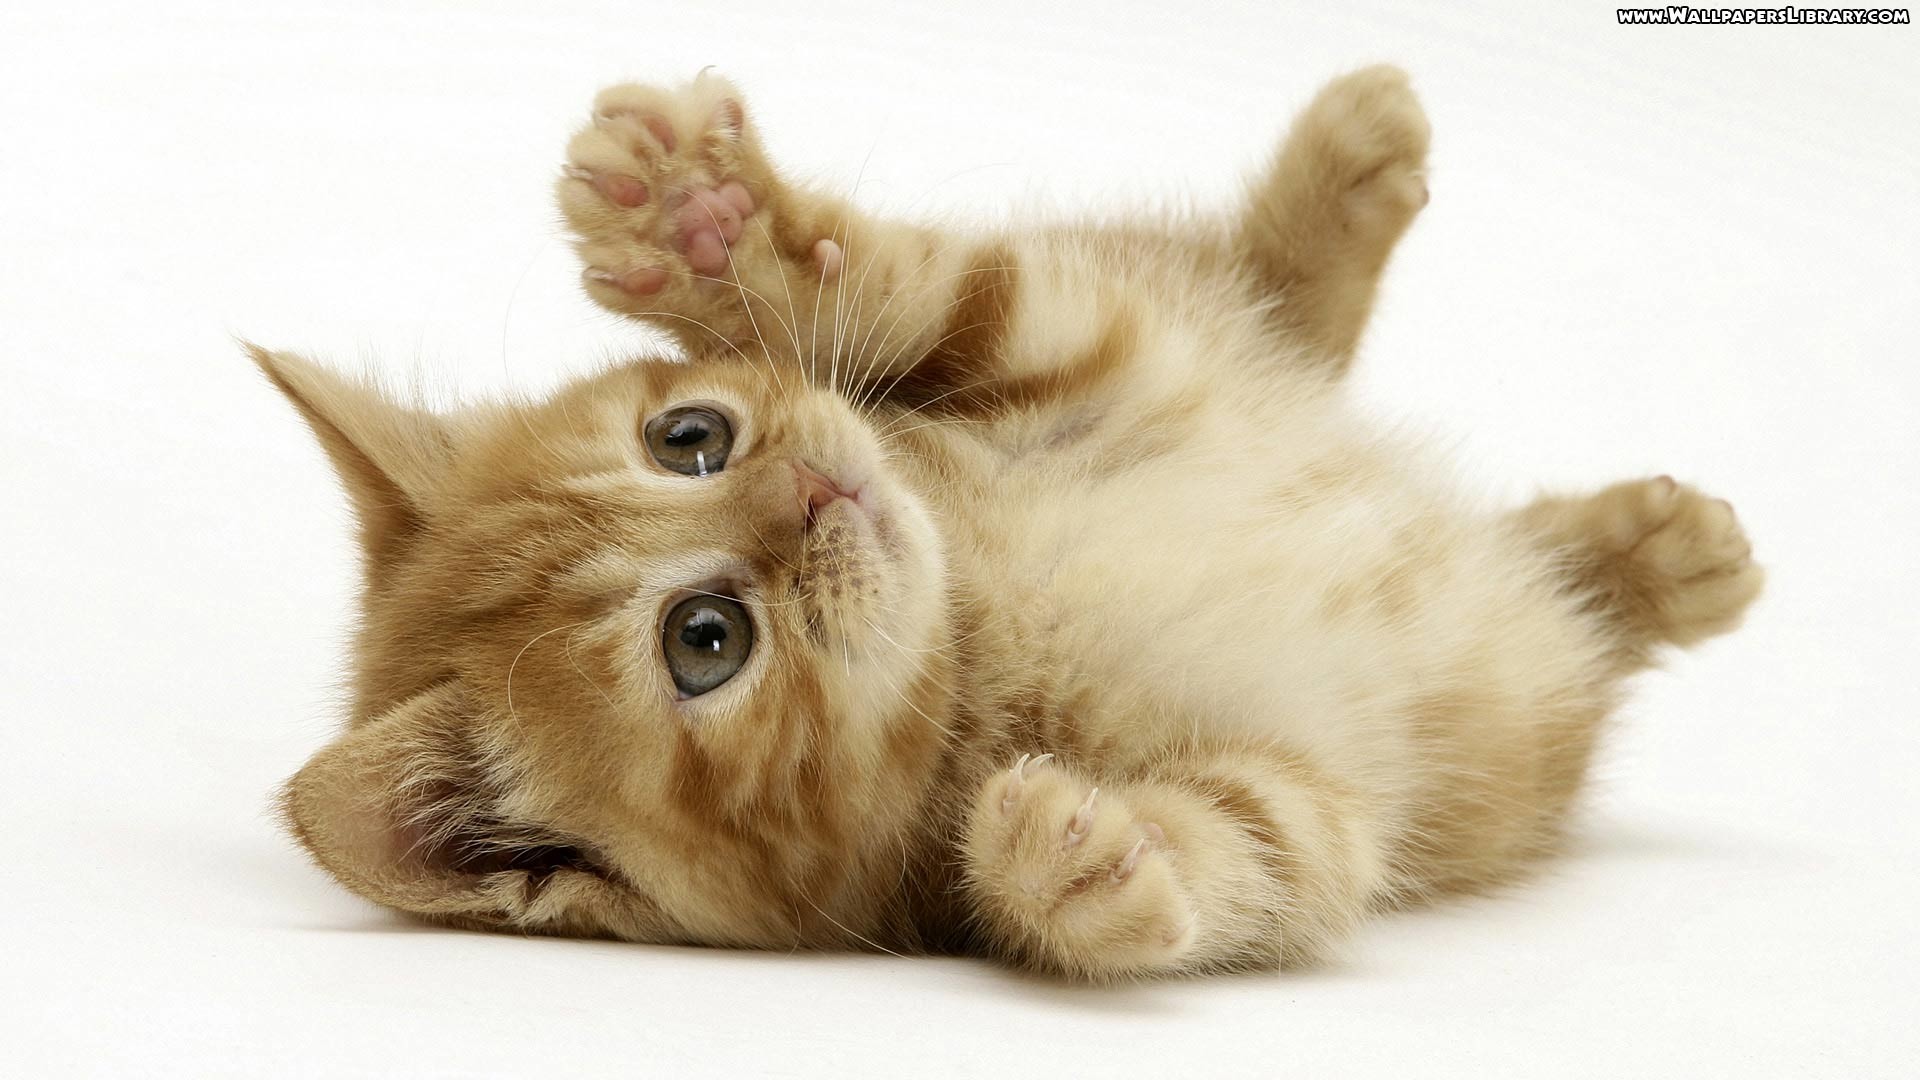 1920x1080 Cute Kitten Wallpaper Android Apps on Google Play